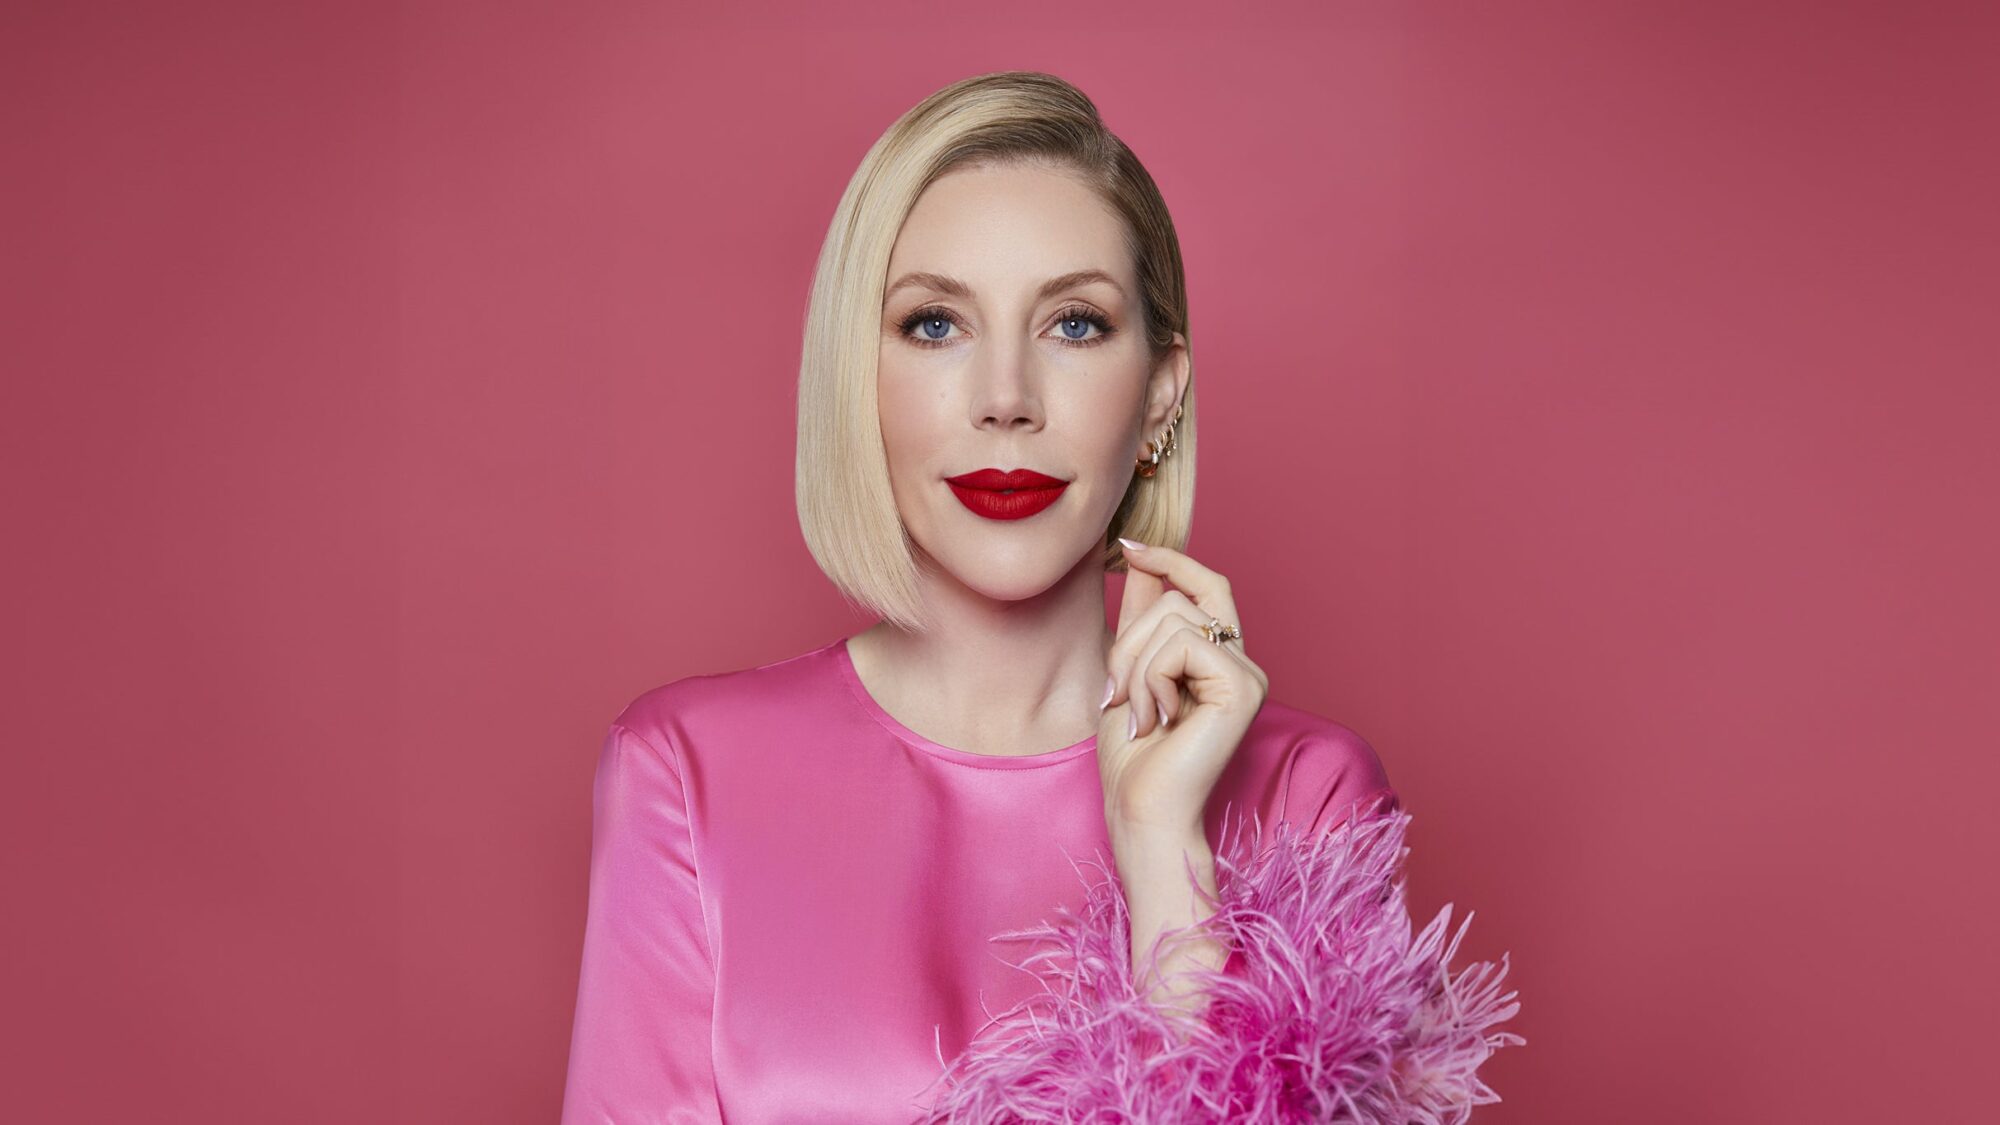 Image name Katherine Ryan Battleaxe at Doncaster Dome Doncaster the 9 image from the post Katherine Ryan - Battleaxe at Leeds Grand Theatre, Leeds in Yorkshire.com.